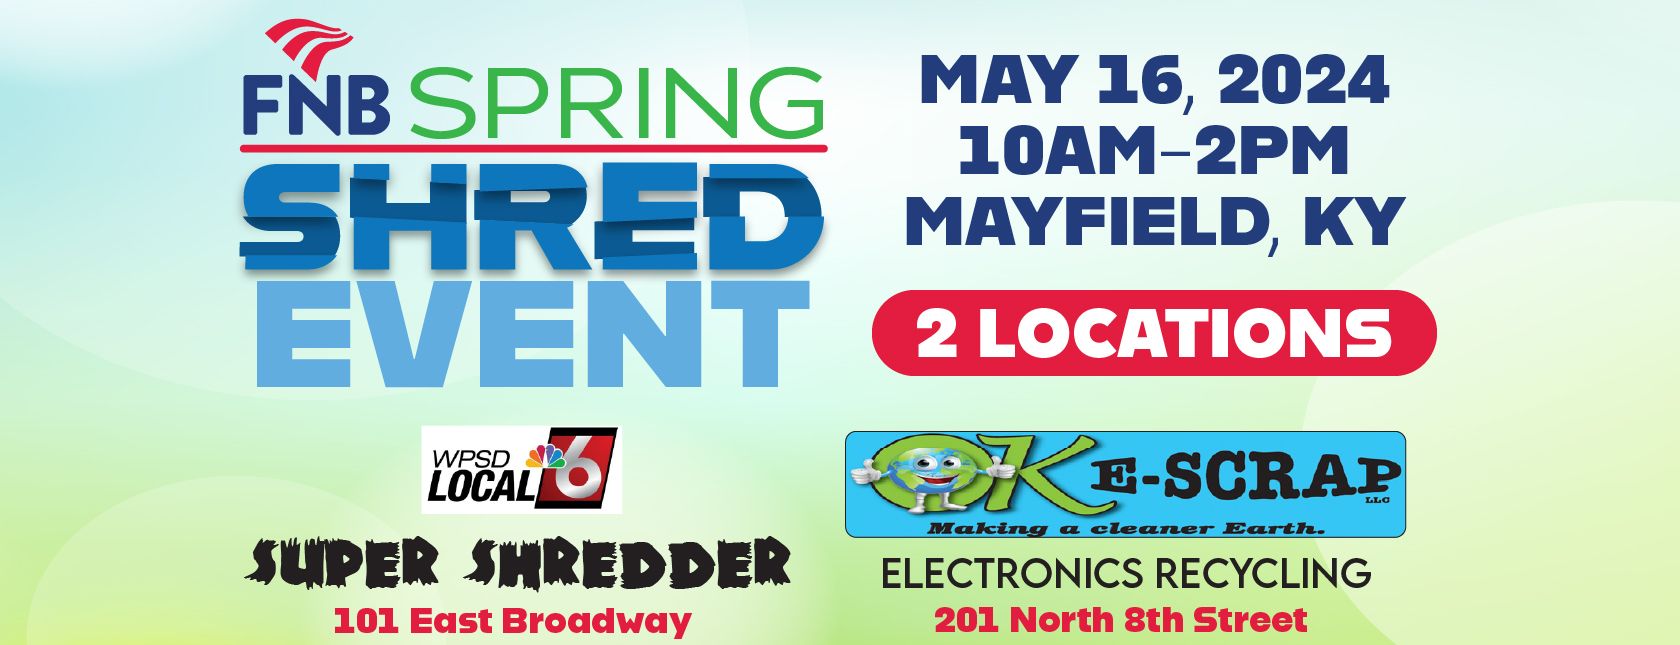 FNB's Spring Shred Event on Thursday, May 16th